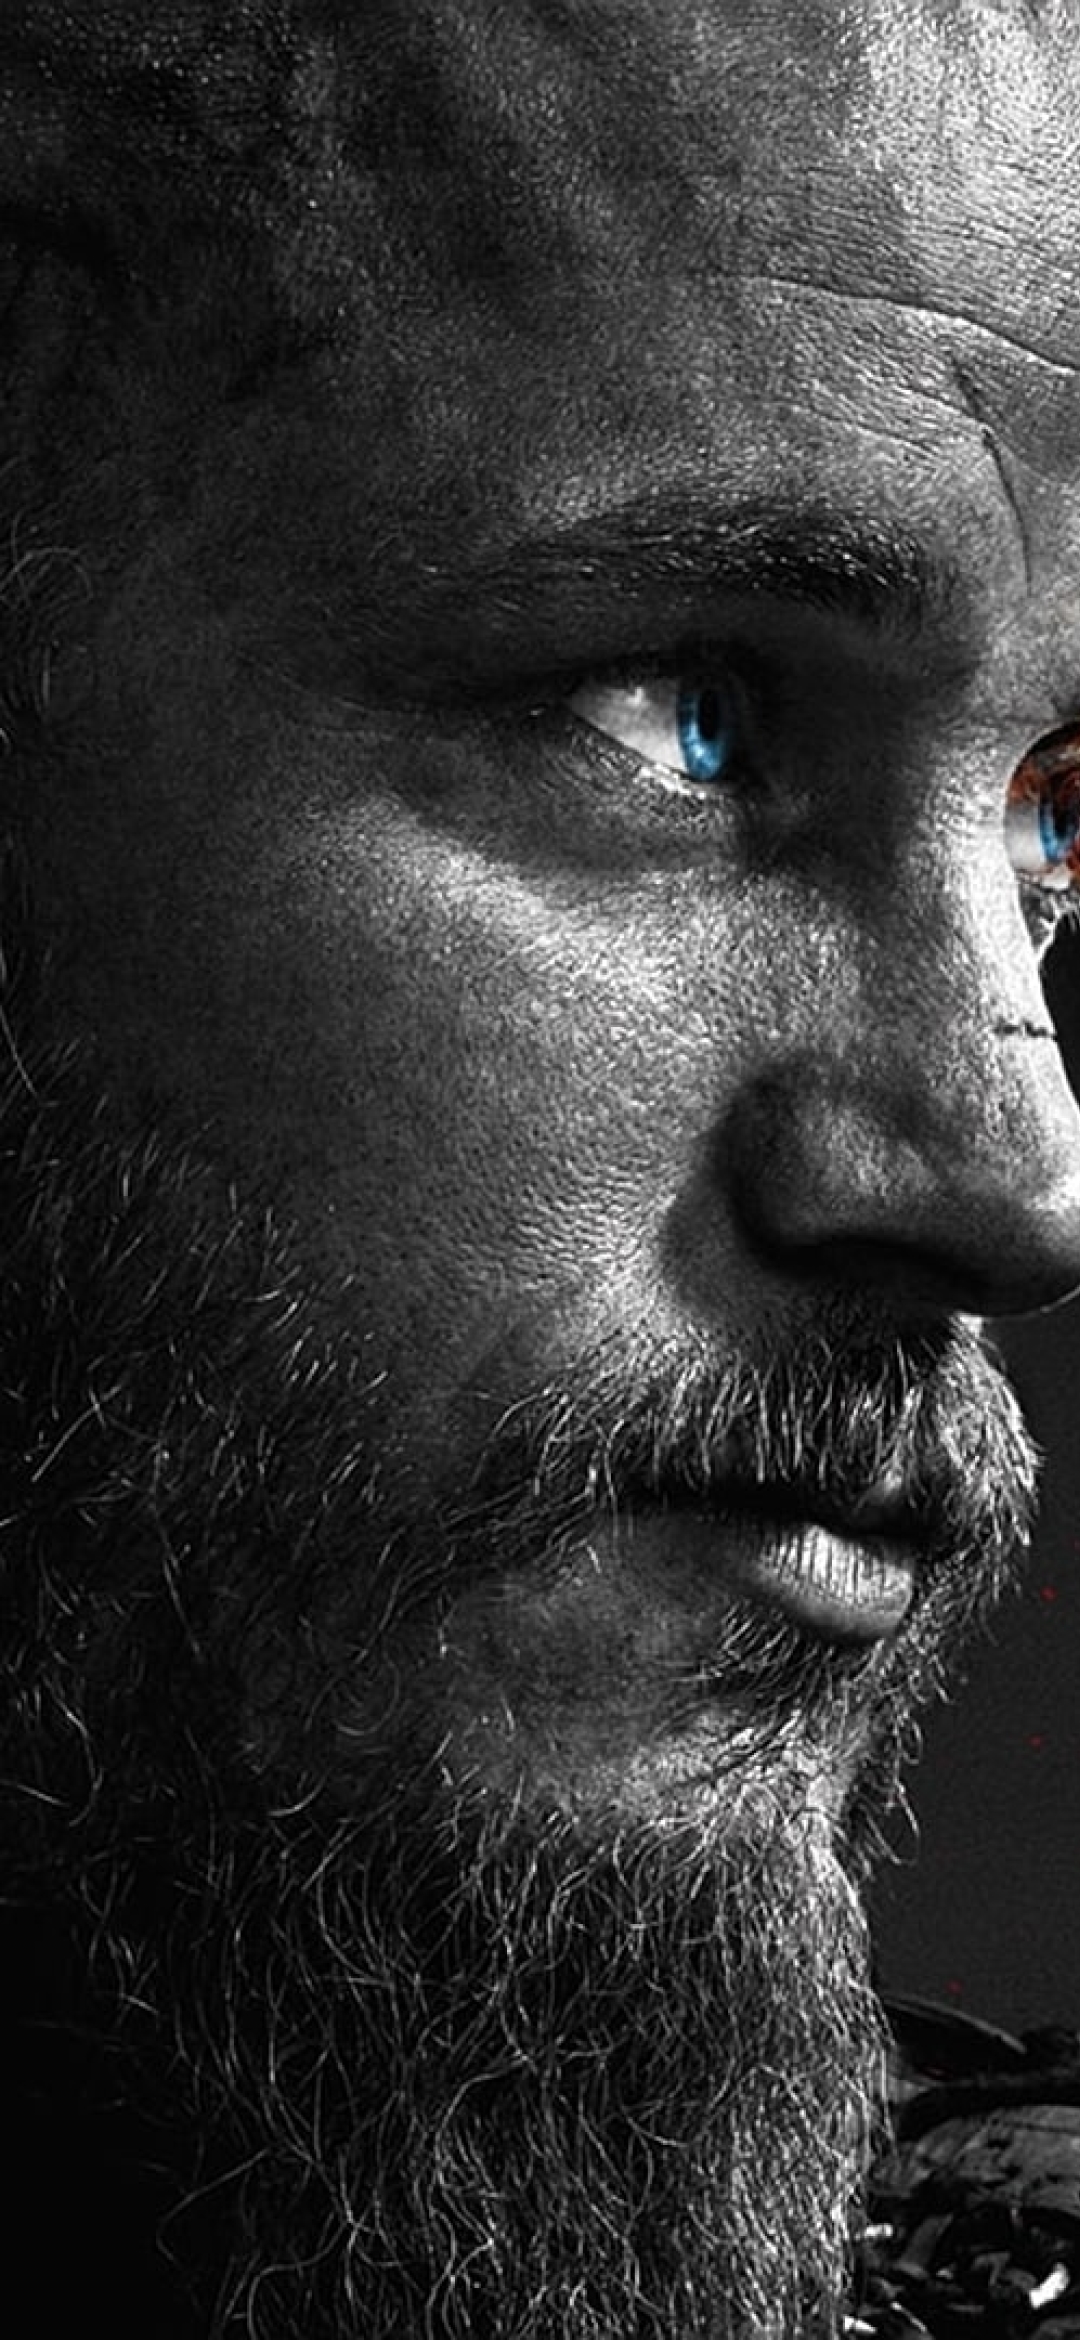 Featured image of post Ragnar Wallpaper 4K Valorant wallpapers 4k hd for desktop iphone pc laptop computer android phone smartphone imac macbook tablet mobile device